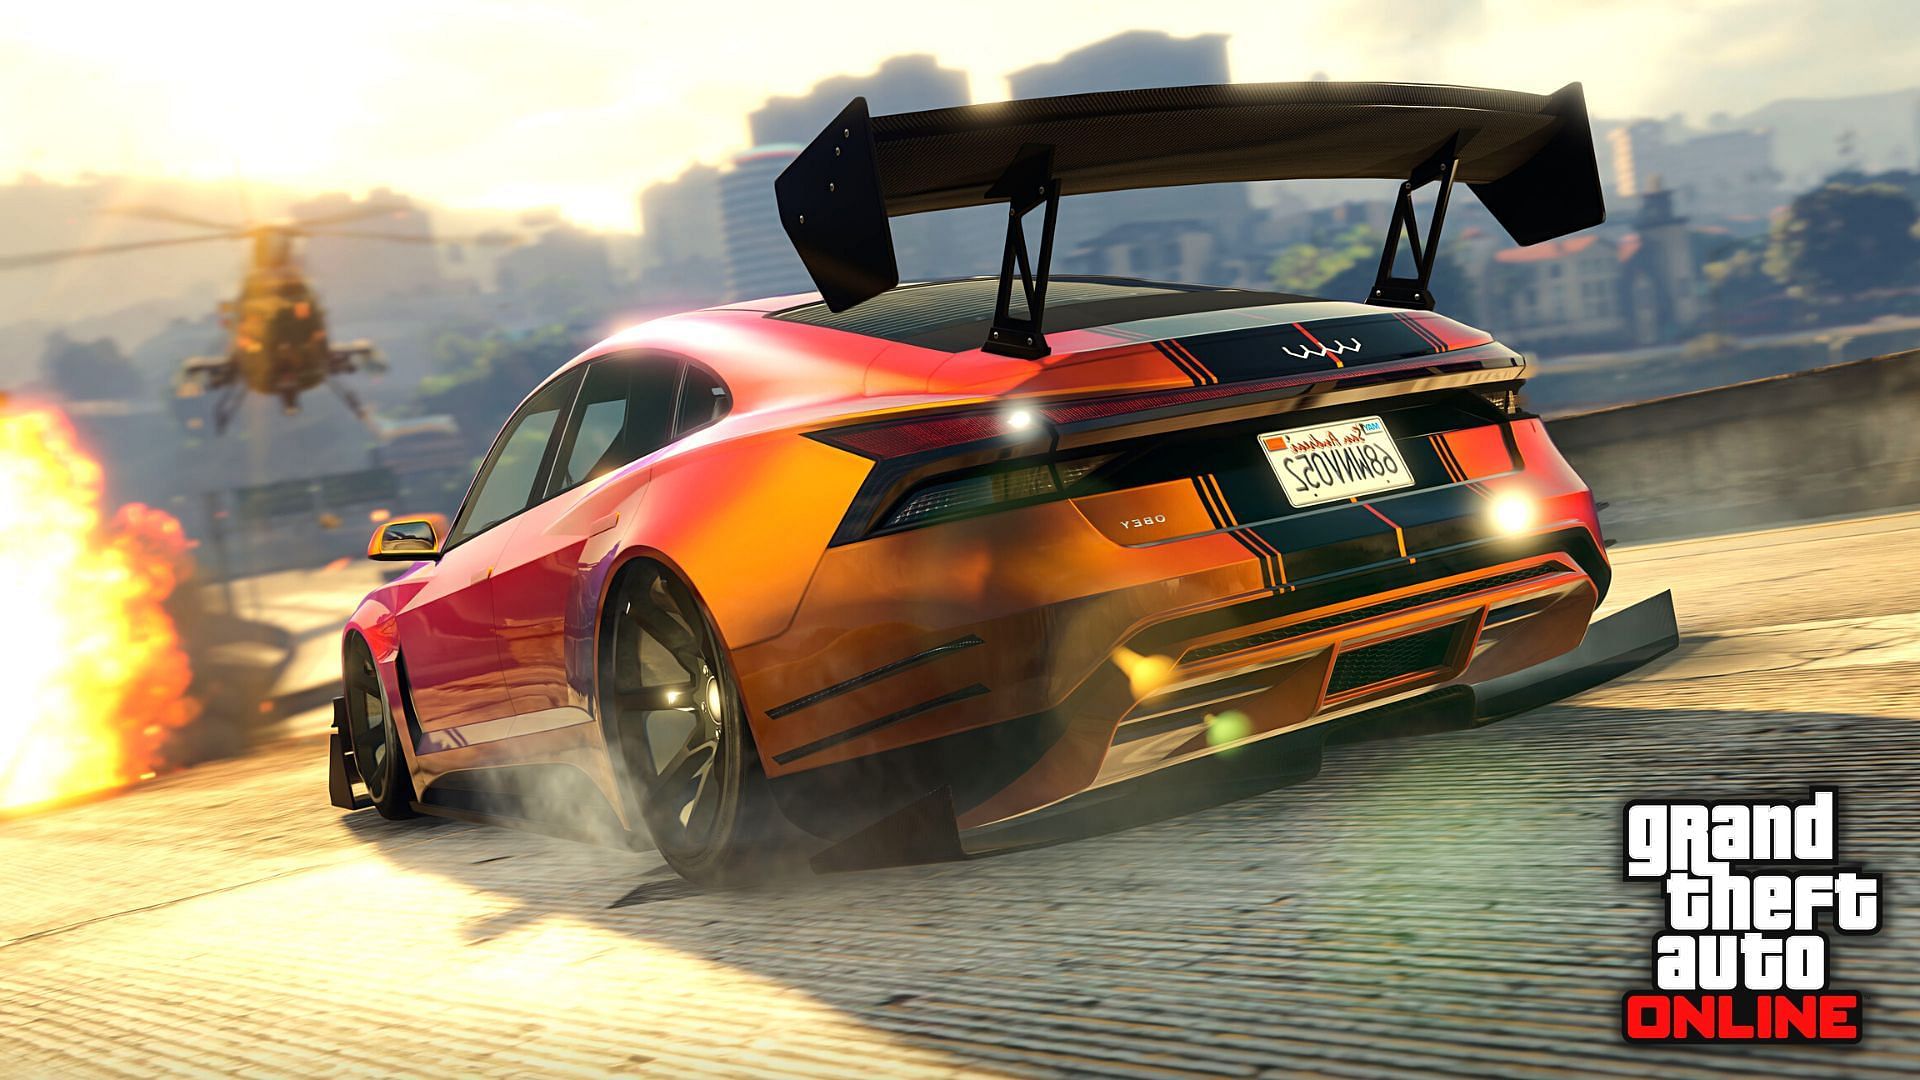 5 improvements that GTA Online fans want in a future update